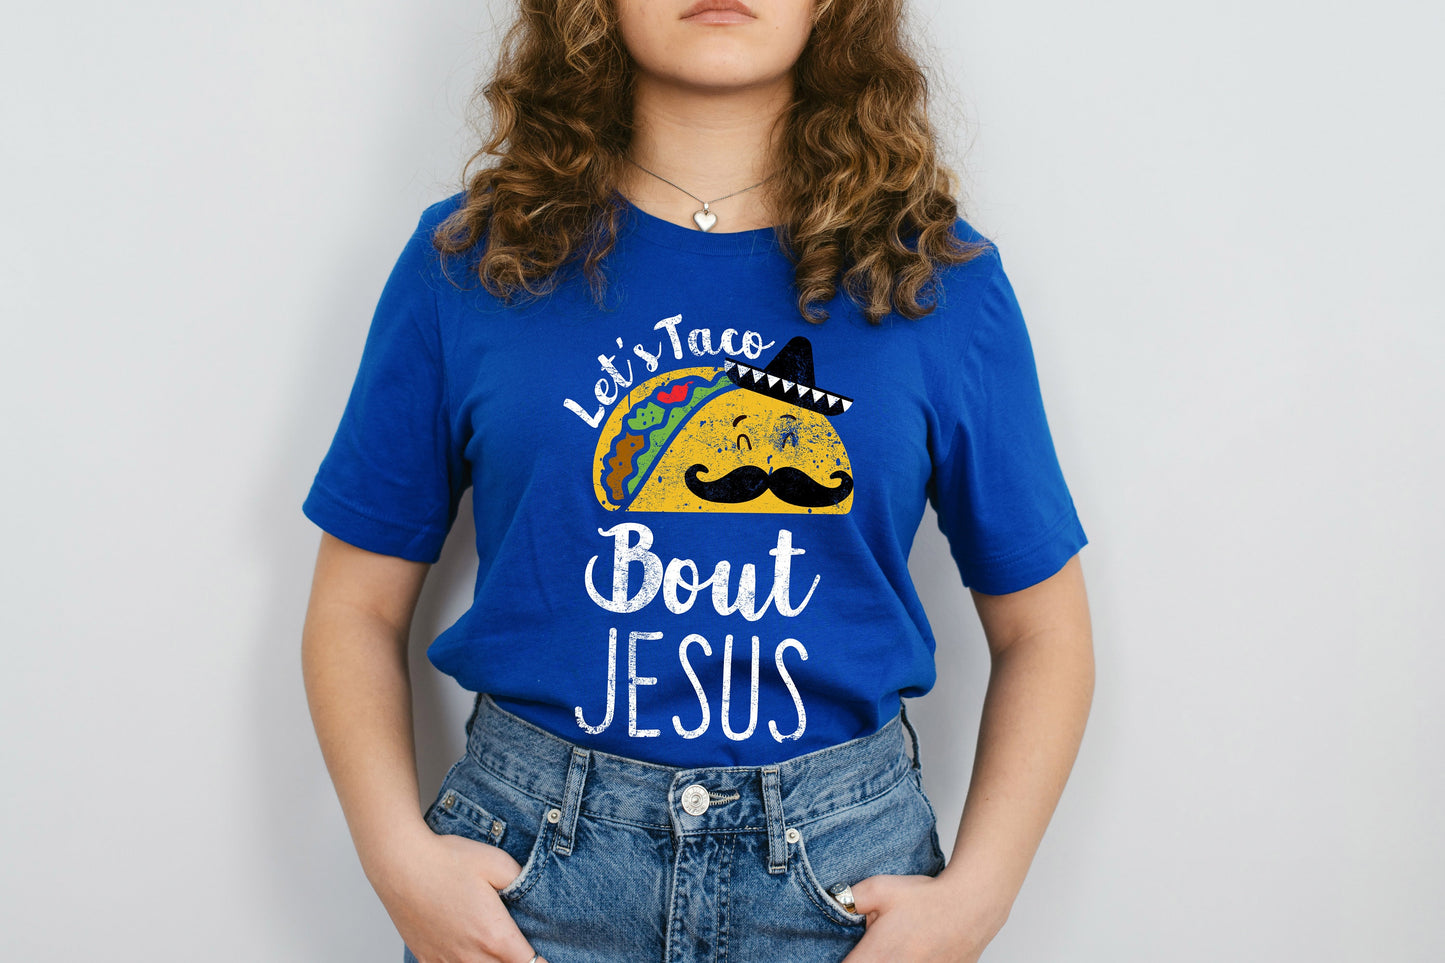 Let's Taco Bout Jesus Lets talk about Jesus Vintage Ultra Soft Graphic Tee Unisex Soft Tee T-shirt for Women or Men